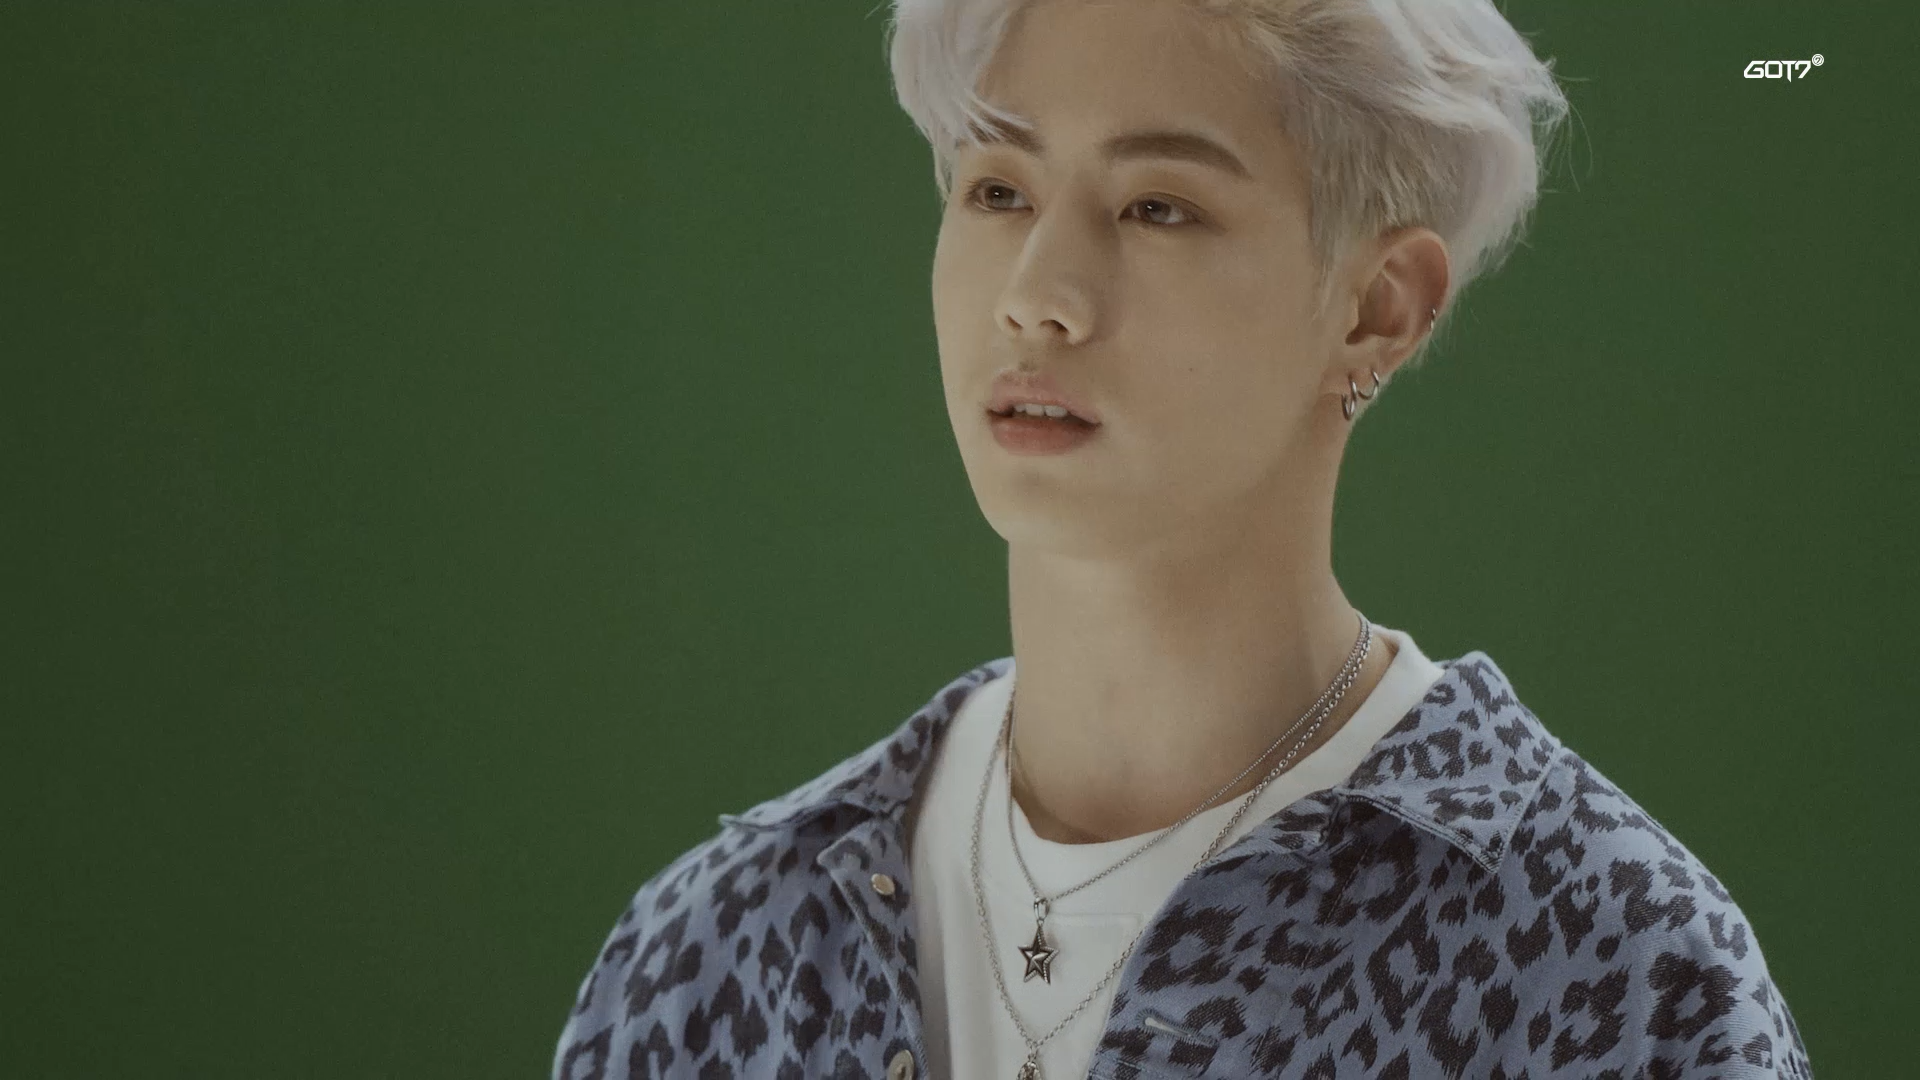 GOT7(갓세븐) MONOGRAPH "SPINNING TOP : BETWEEN SECURITY & INSECURITY" PART3.